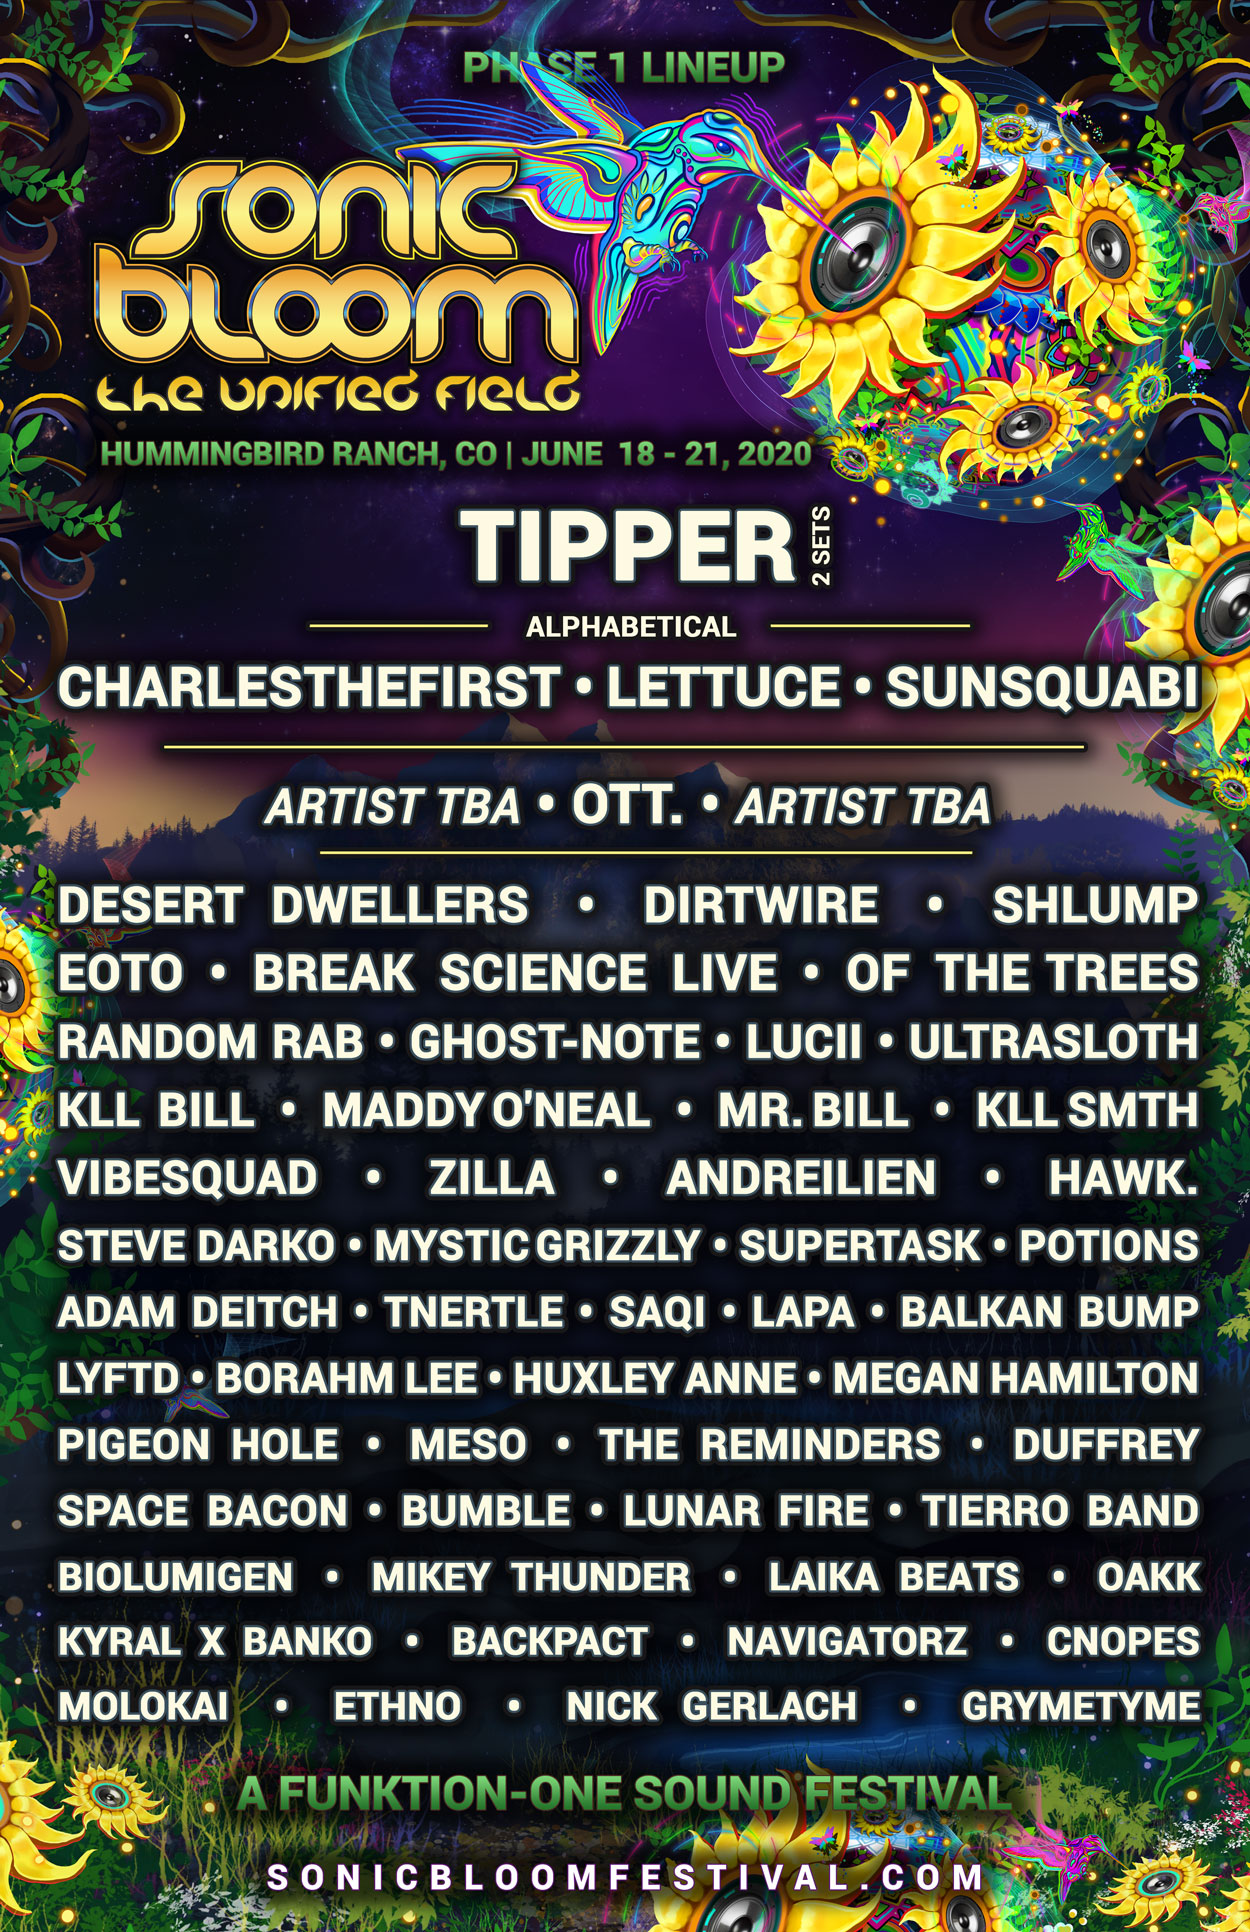 Sonic Bloom initial lineup. Photo by: Sonic Bloom